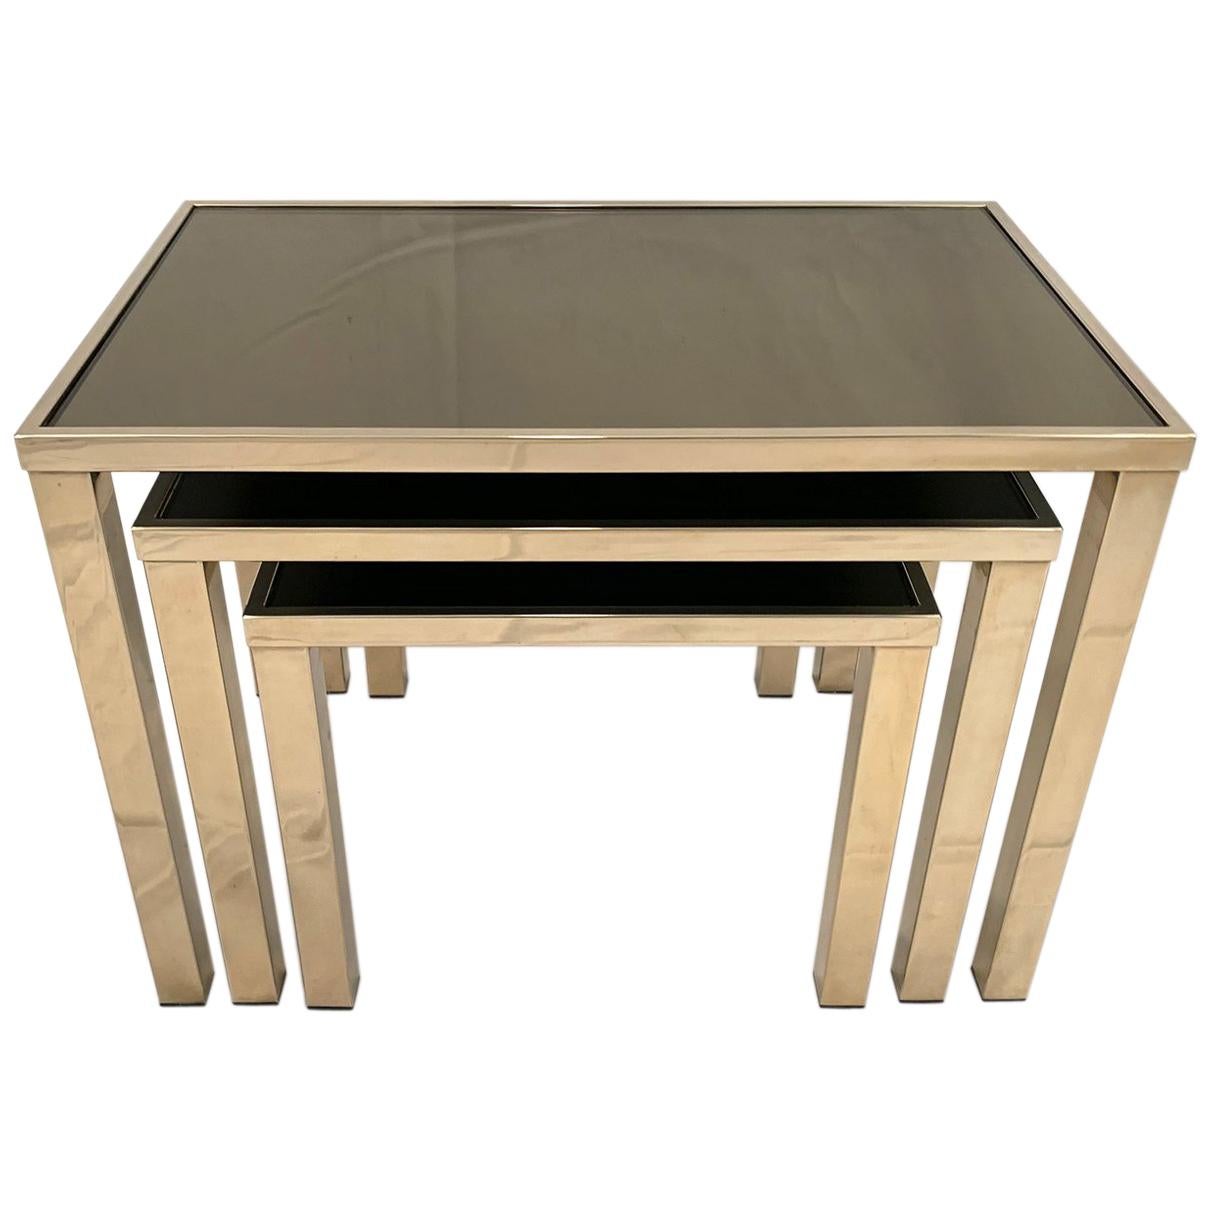 Set of 23-Karat Gold-Plated Nesting Tables by Belgo Chrome For Sale